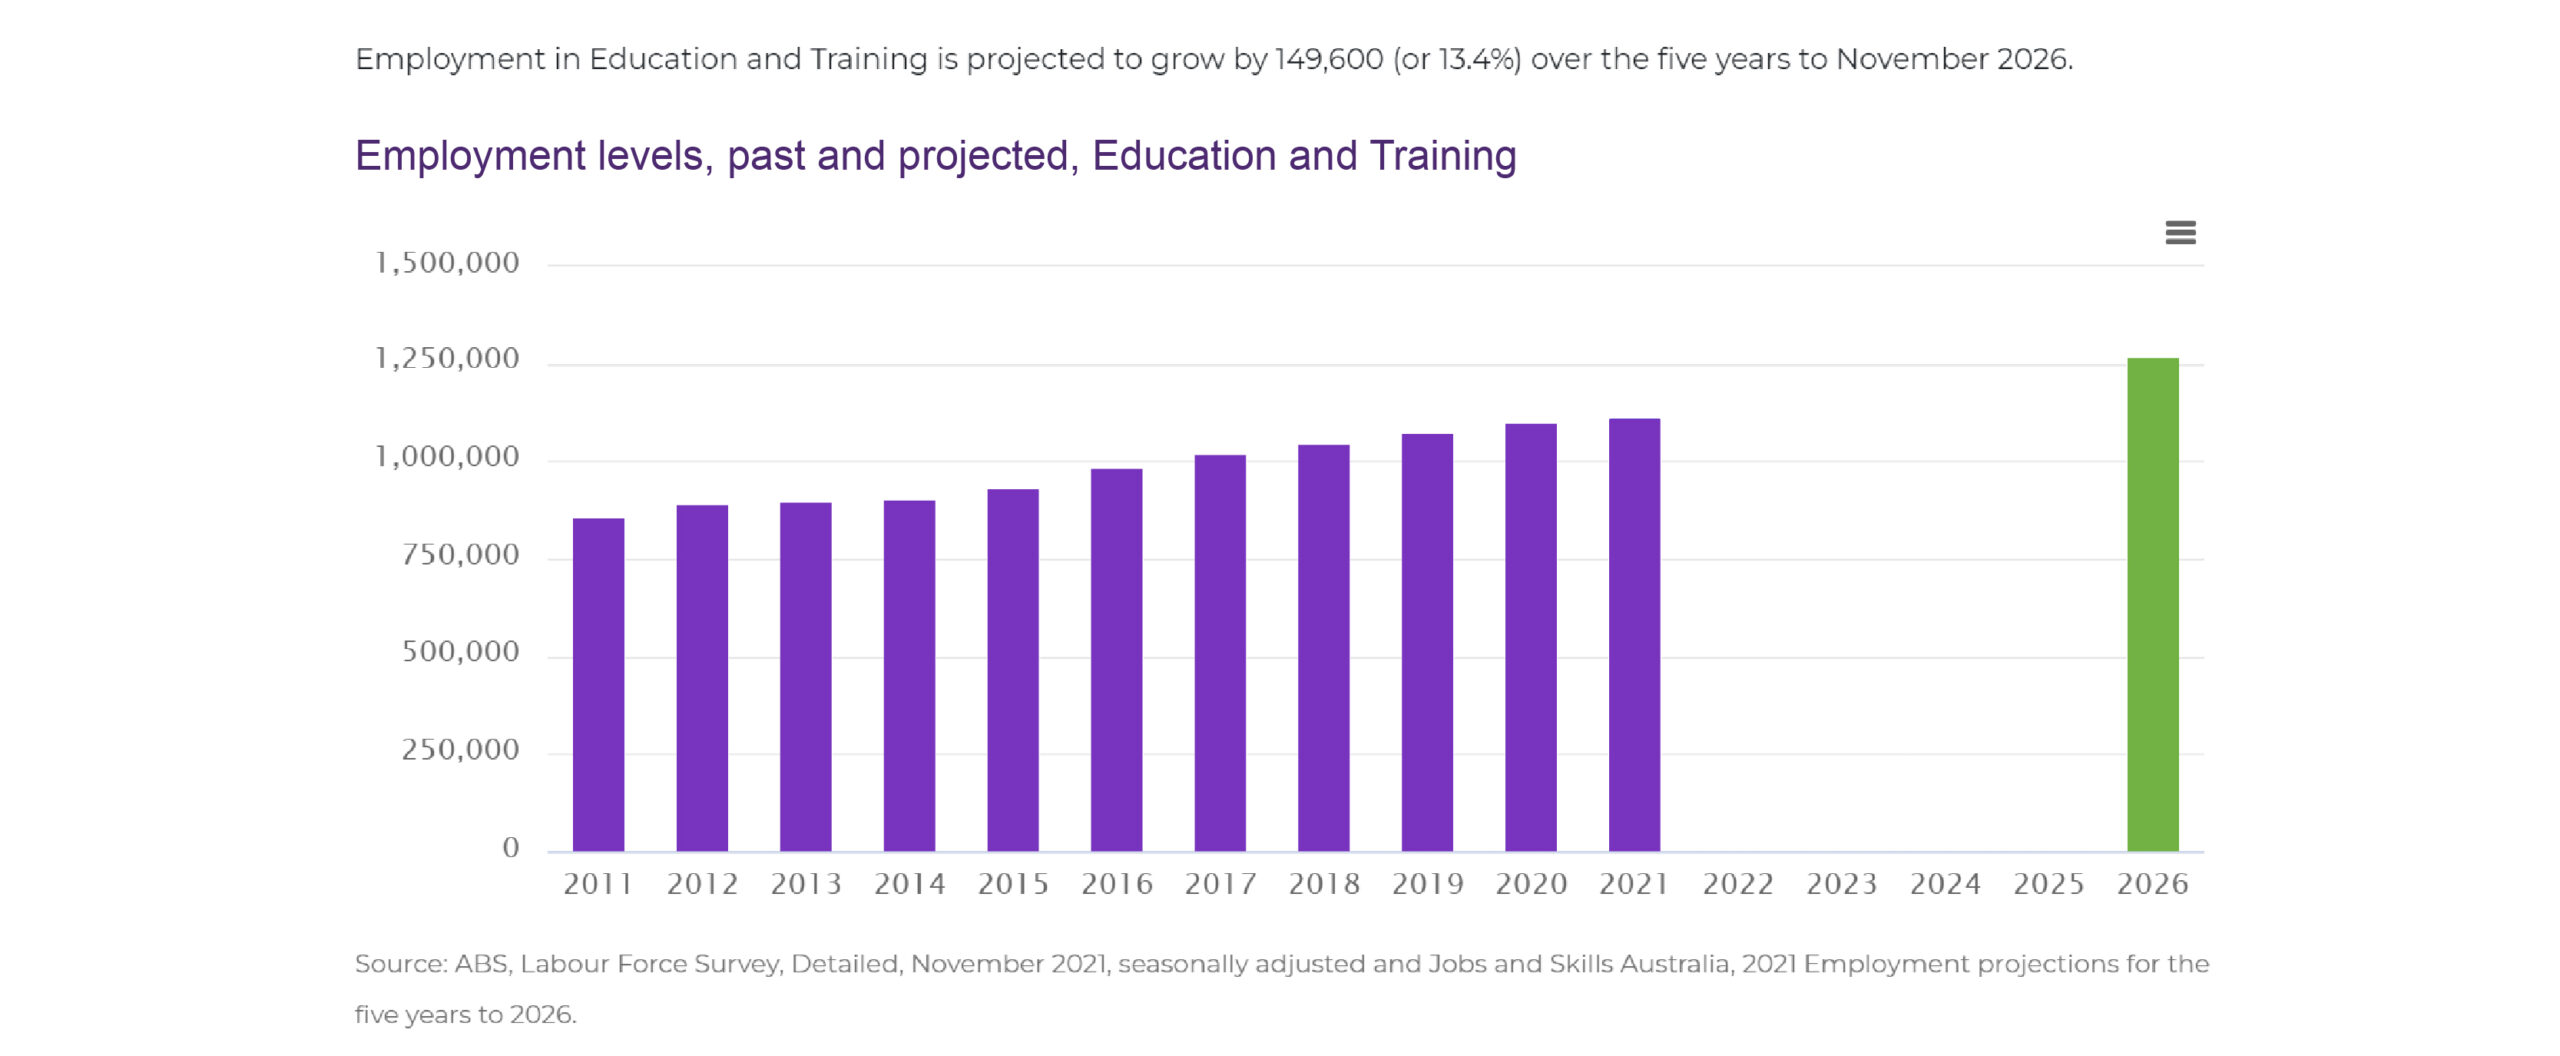 Employment in Education and Training